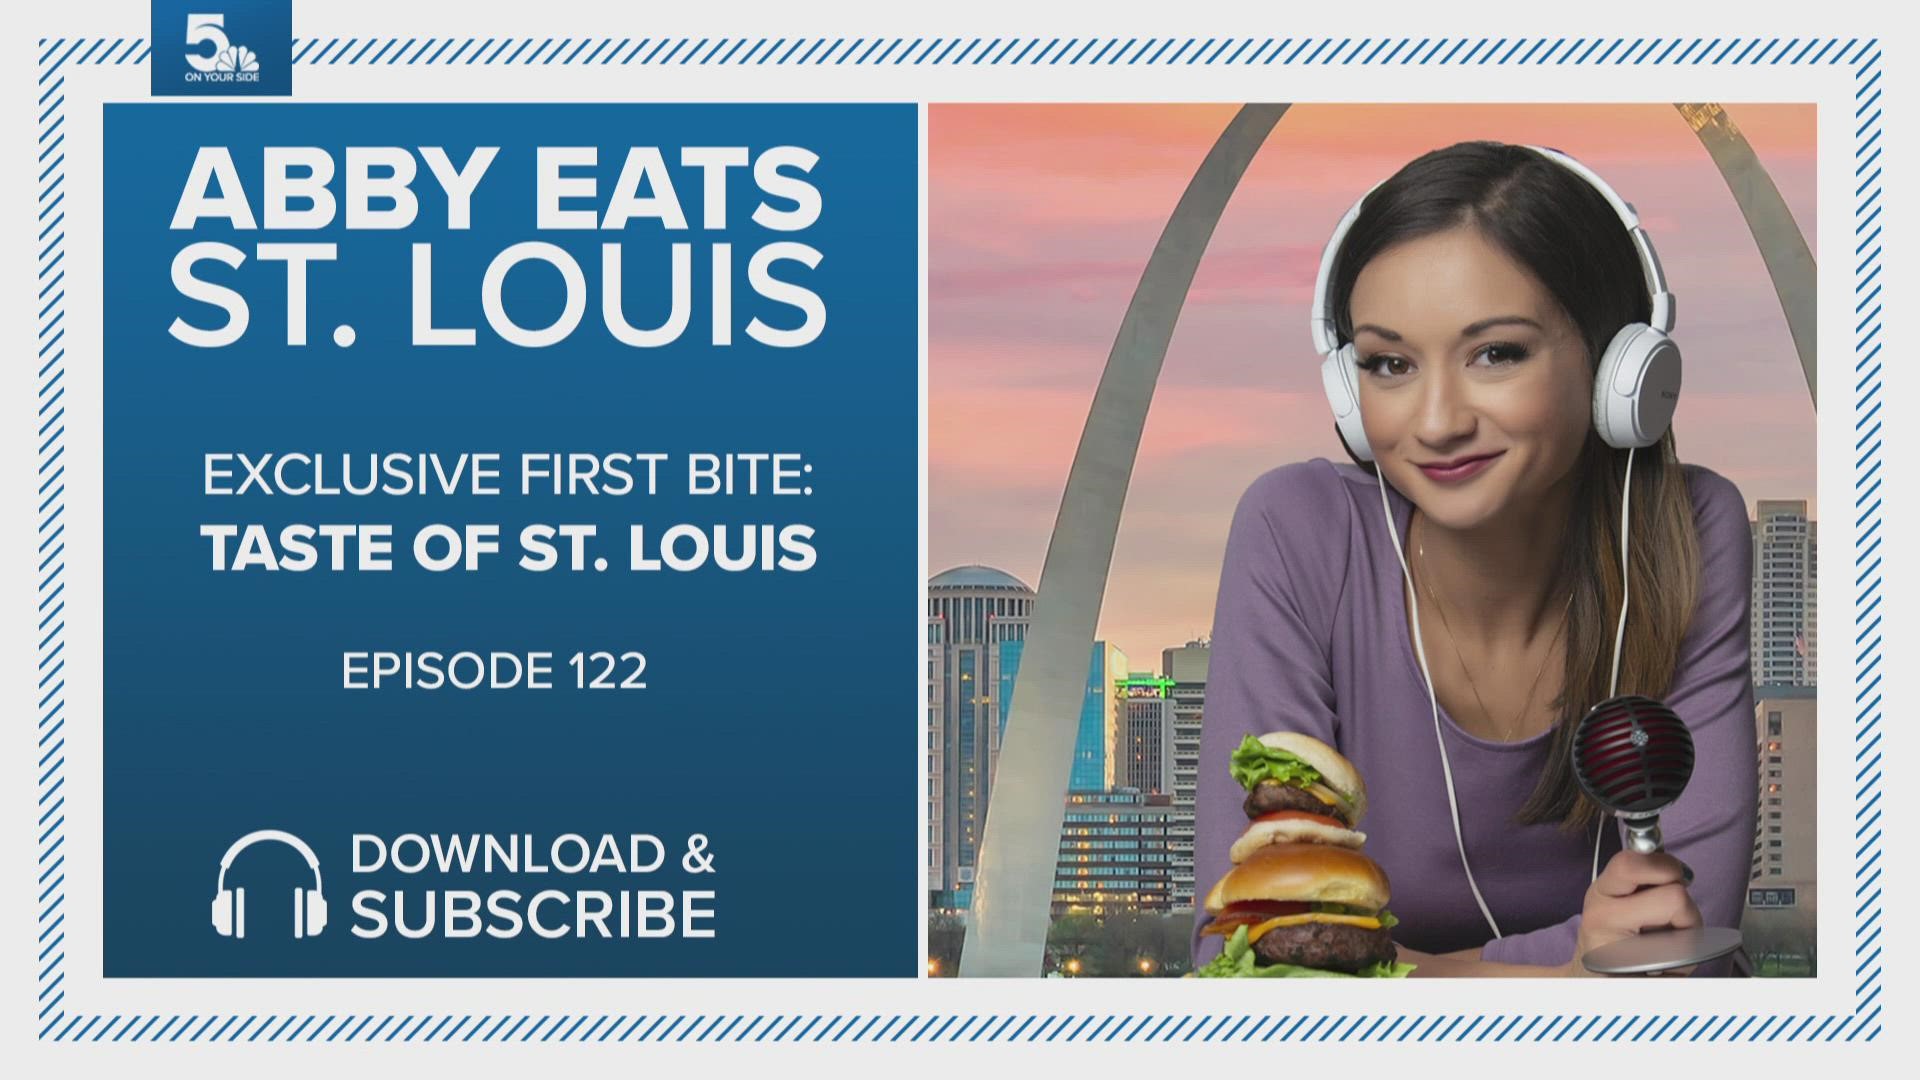 Taste of St. Louis is coming back to downtown this fall. KSDK podcast Abby Eats St. Louis got a first bite of the details from the guys behind the food festival